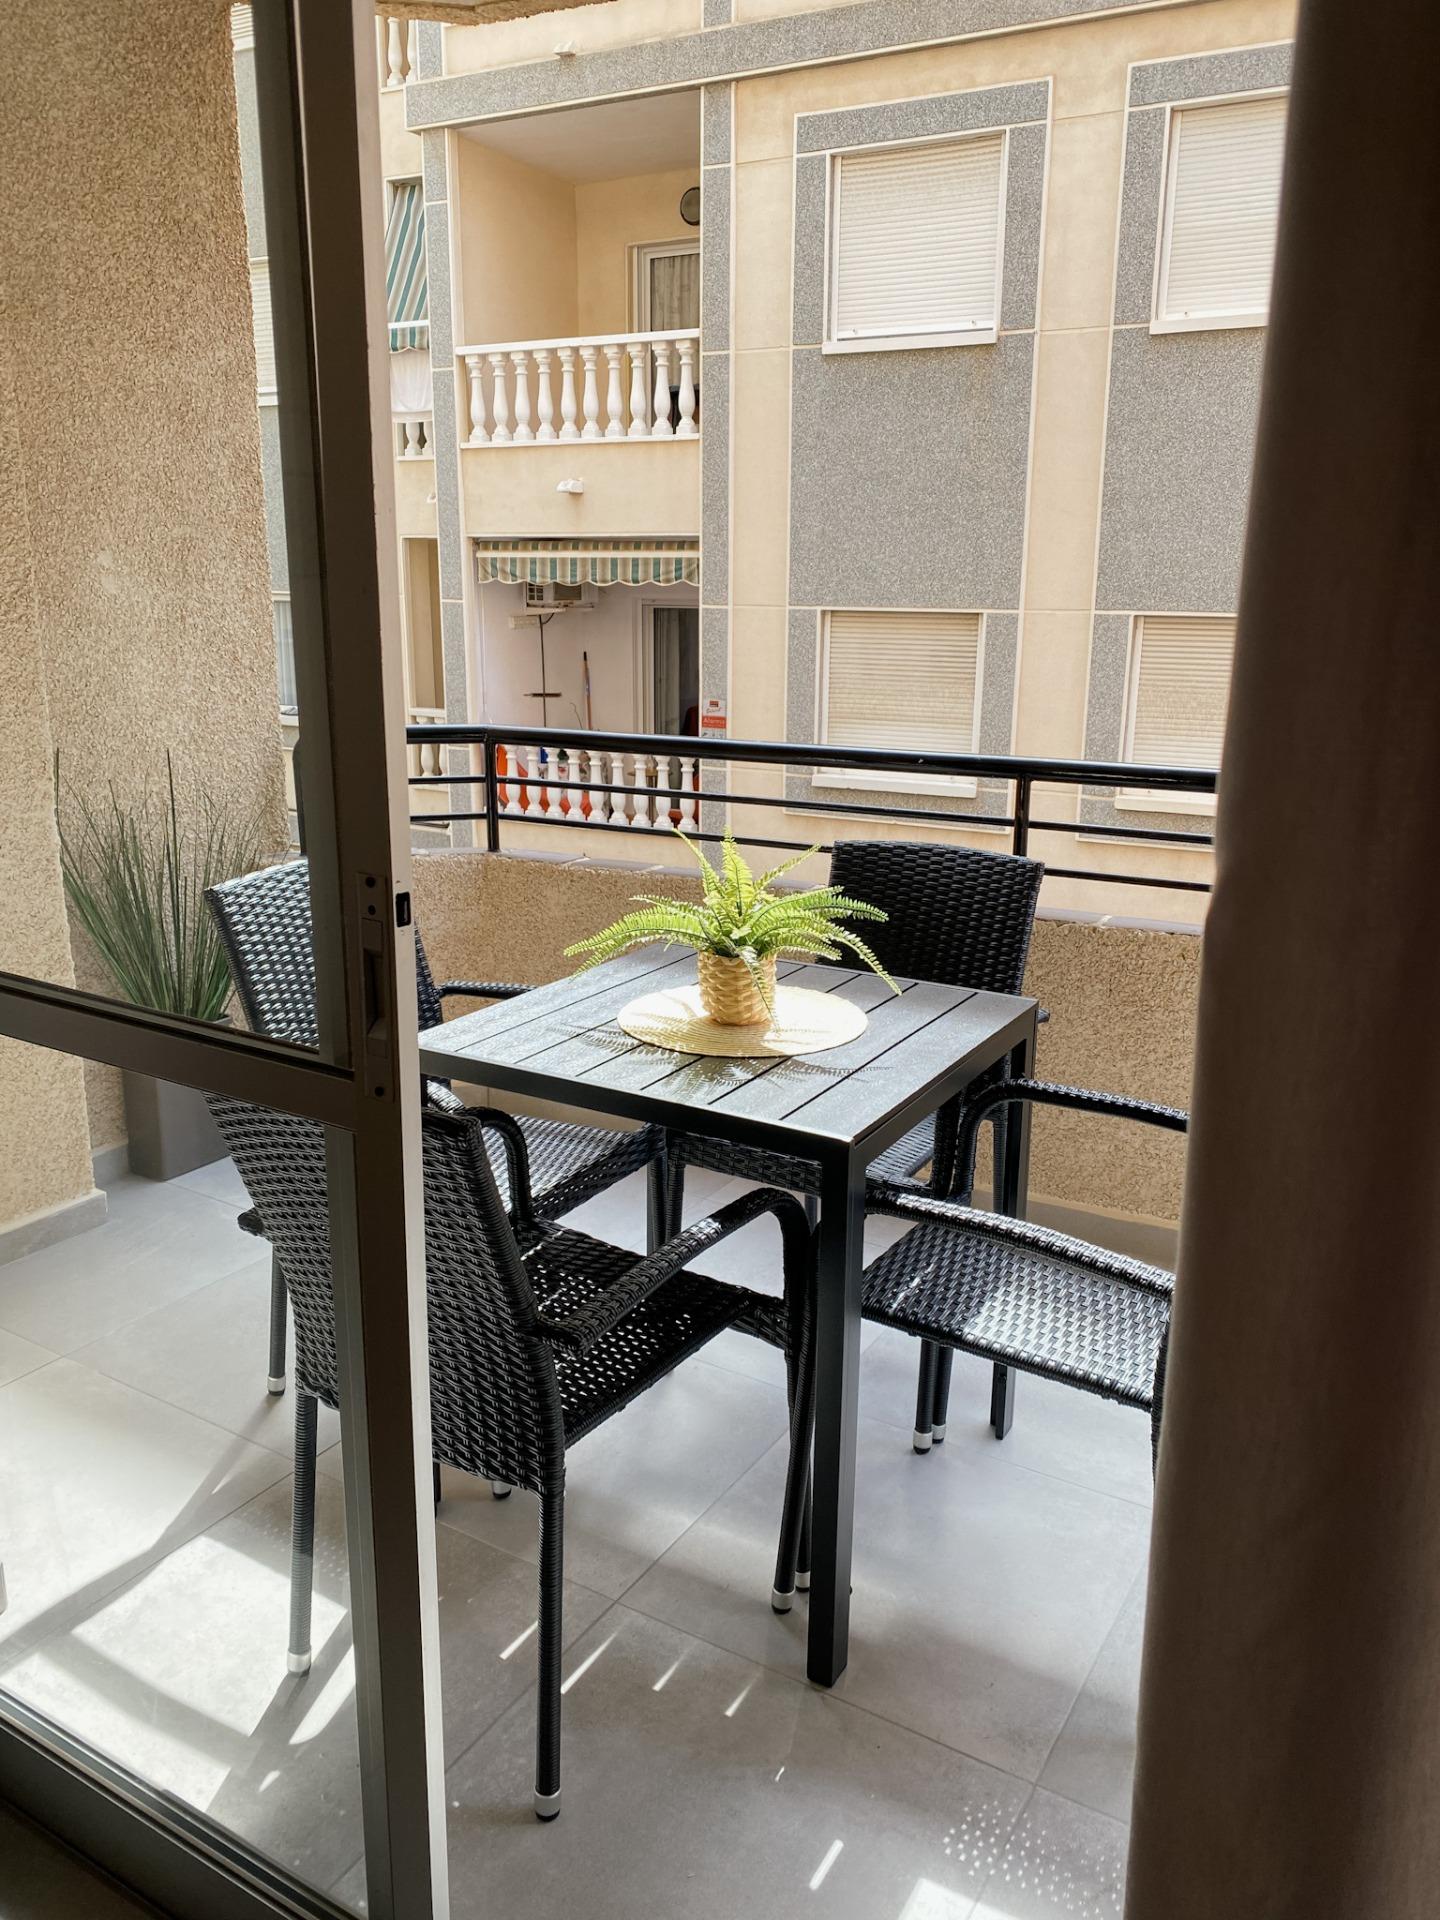 Renovated apartment for sale 200 meters from Los Locos beach in Torrevieja.